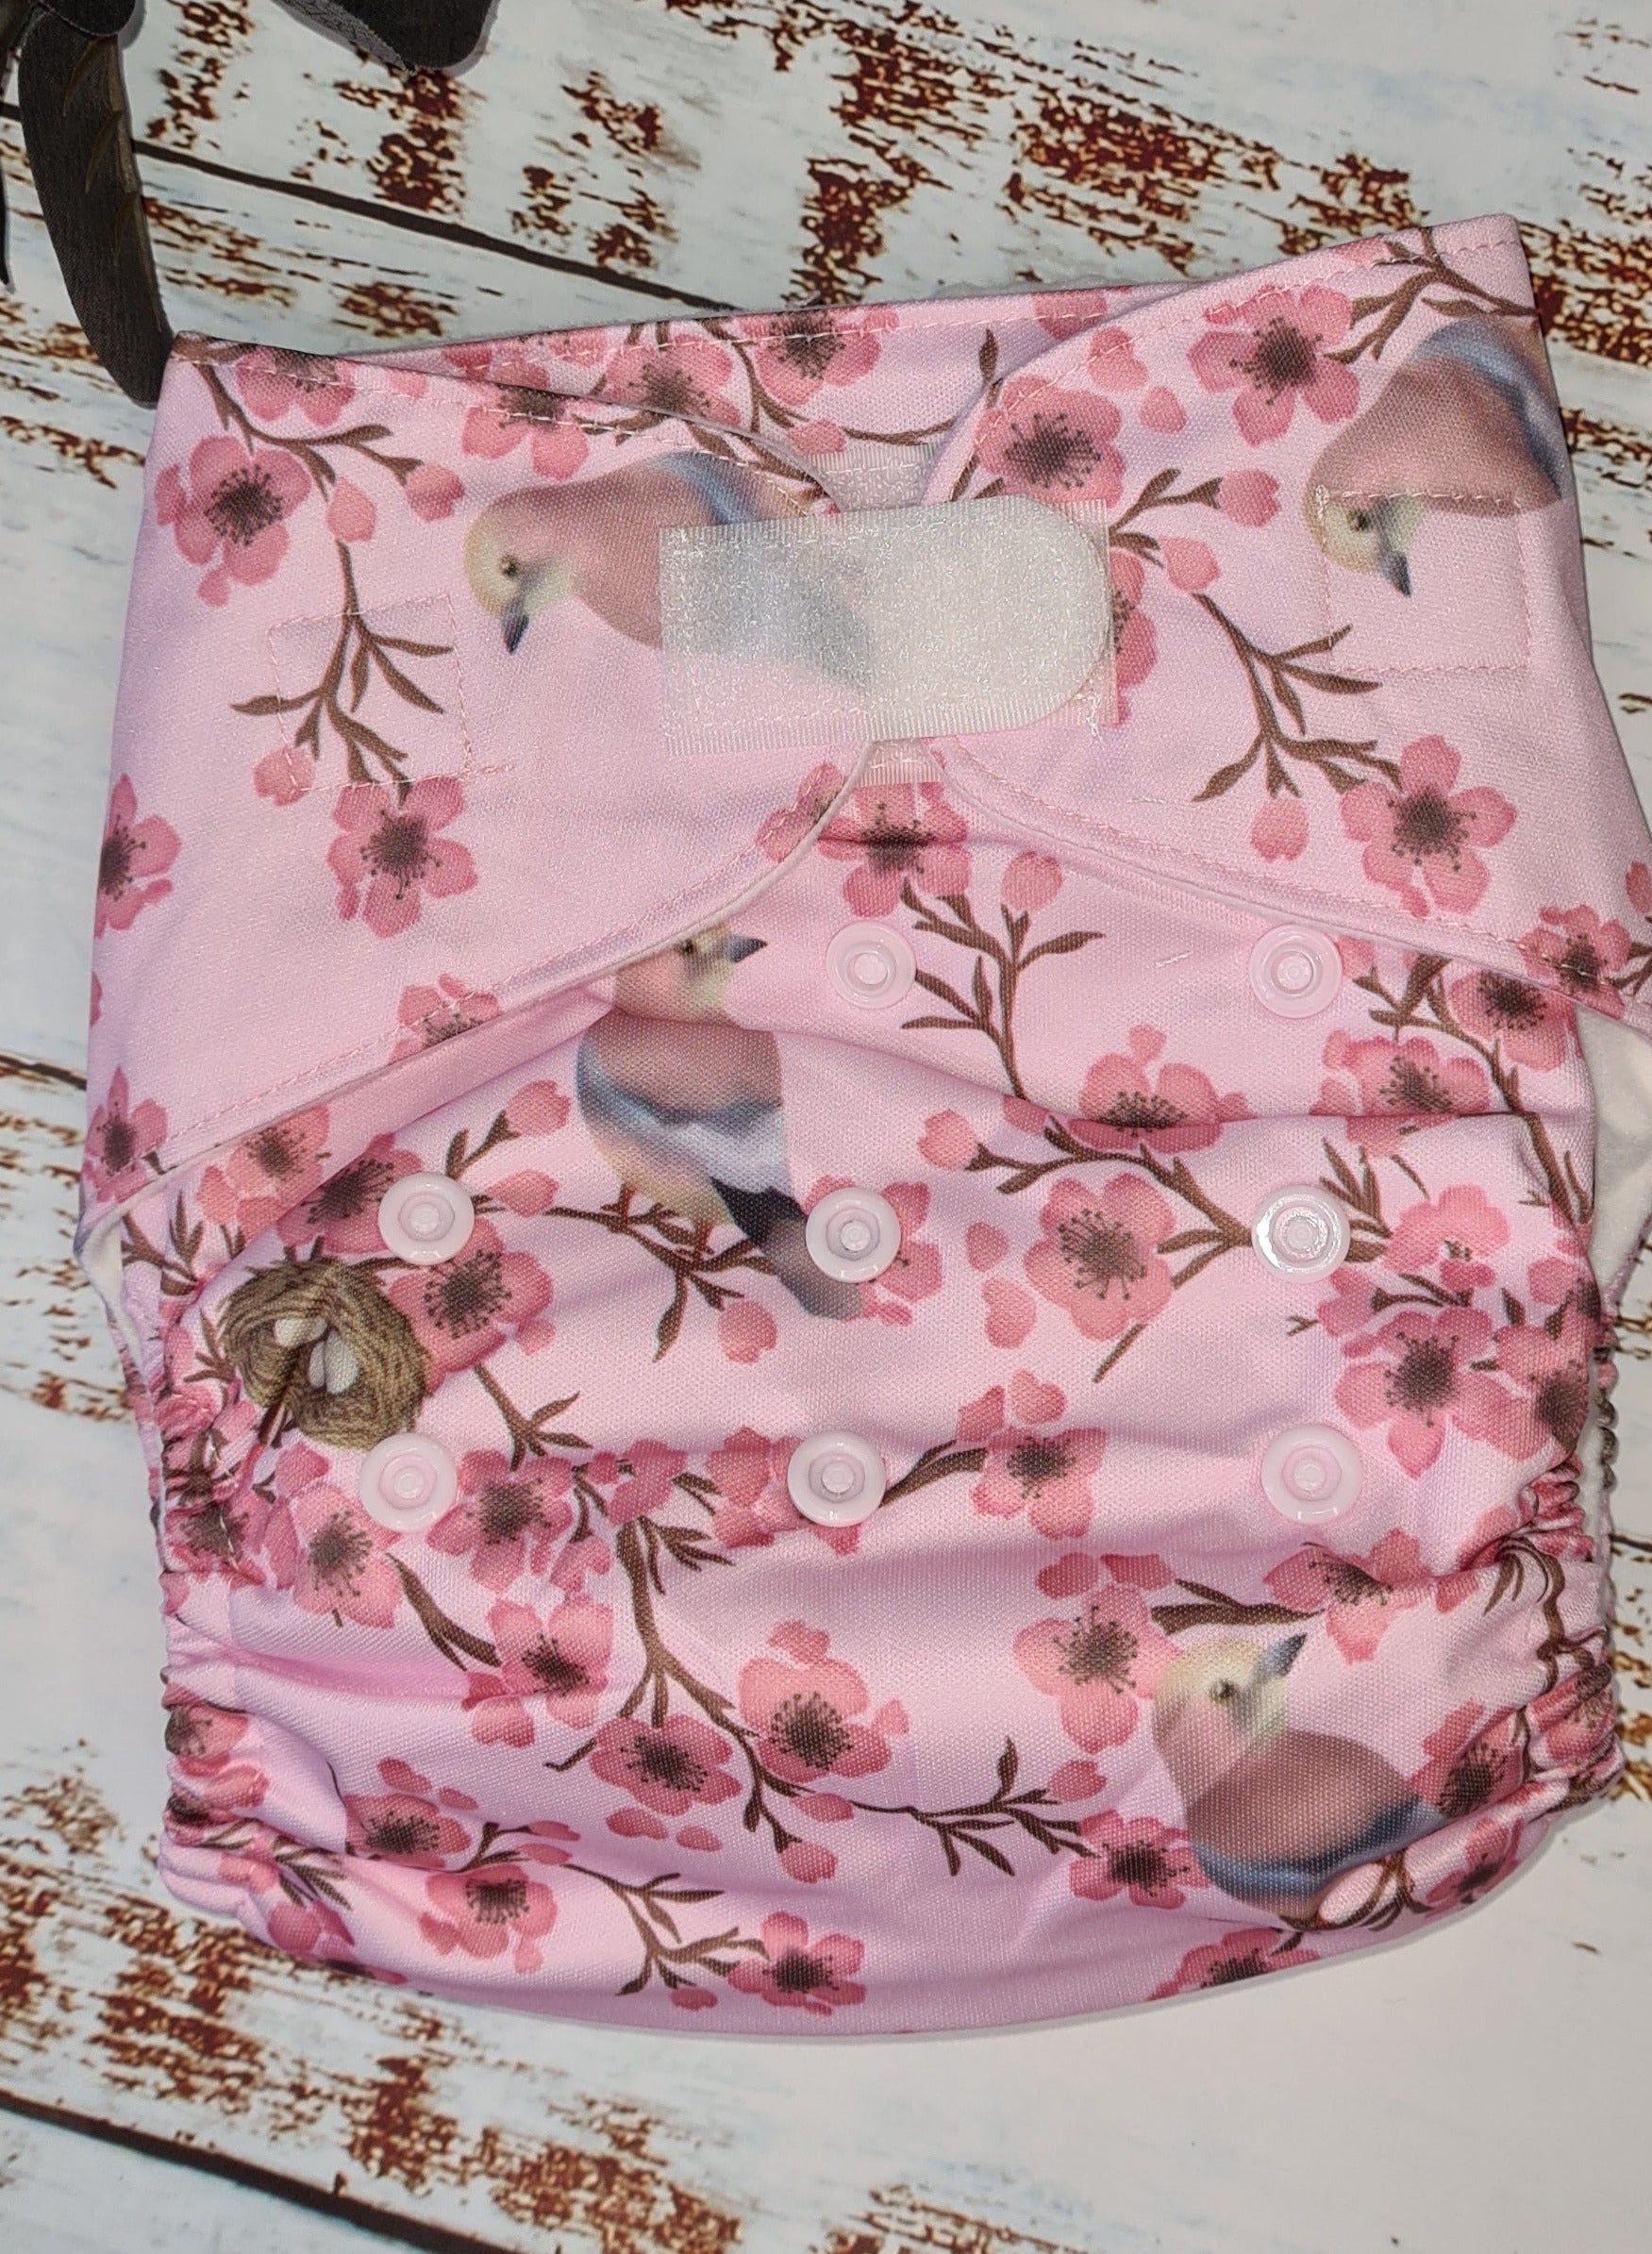 A photograph of cloth diaper pocket nappies and hemp boosters, illustrating their eco-friendly and adjustable design.